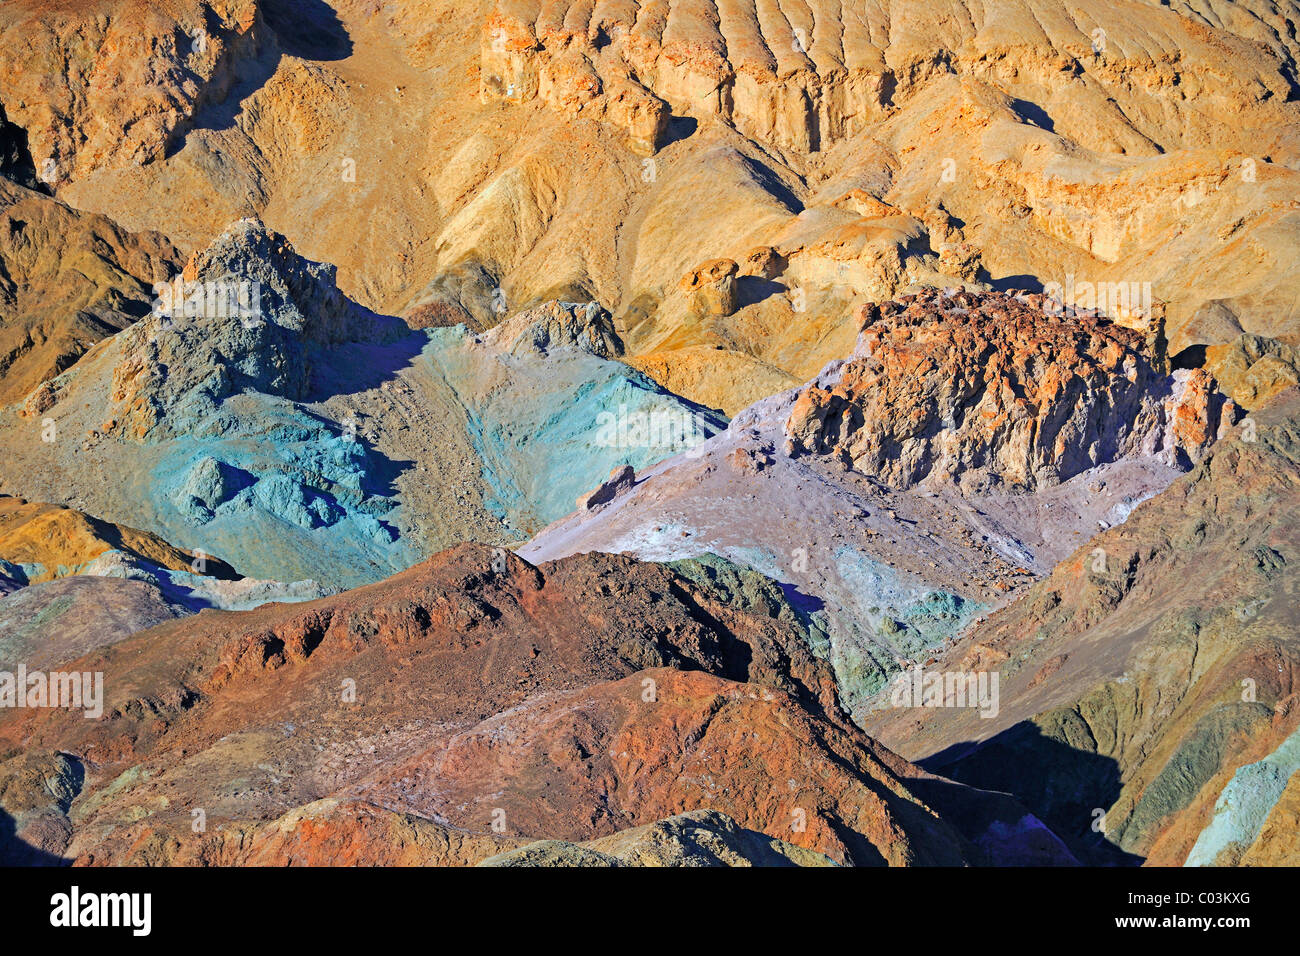 Rocks discoloured by minerals at the Artist's Palette in the evening light, Death Valley National Park, California, USA Stock Photo